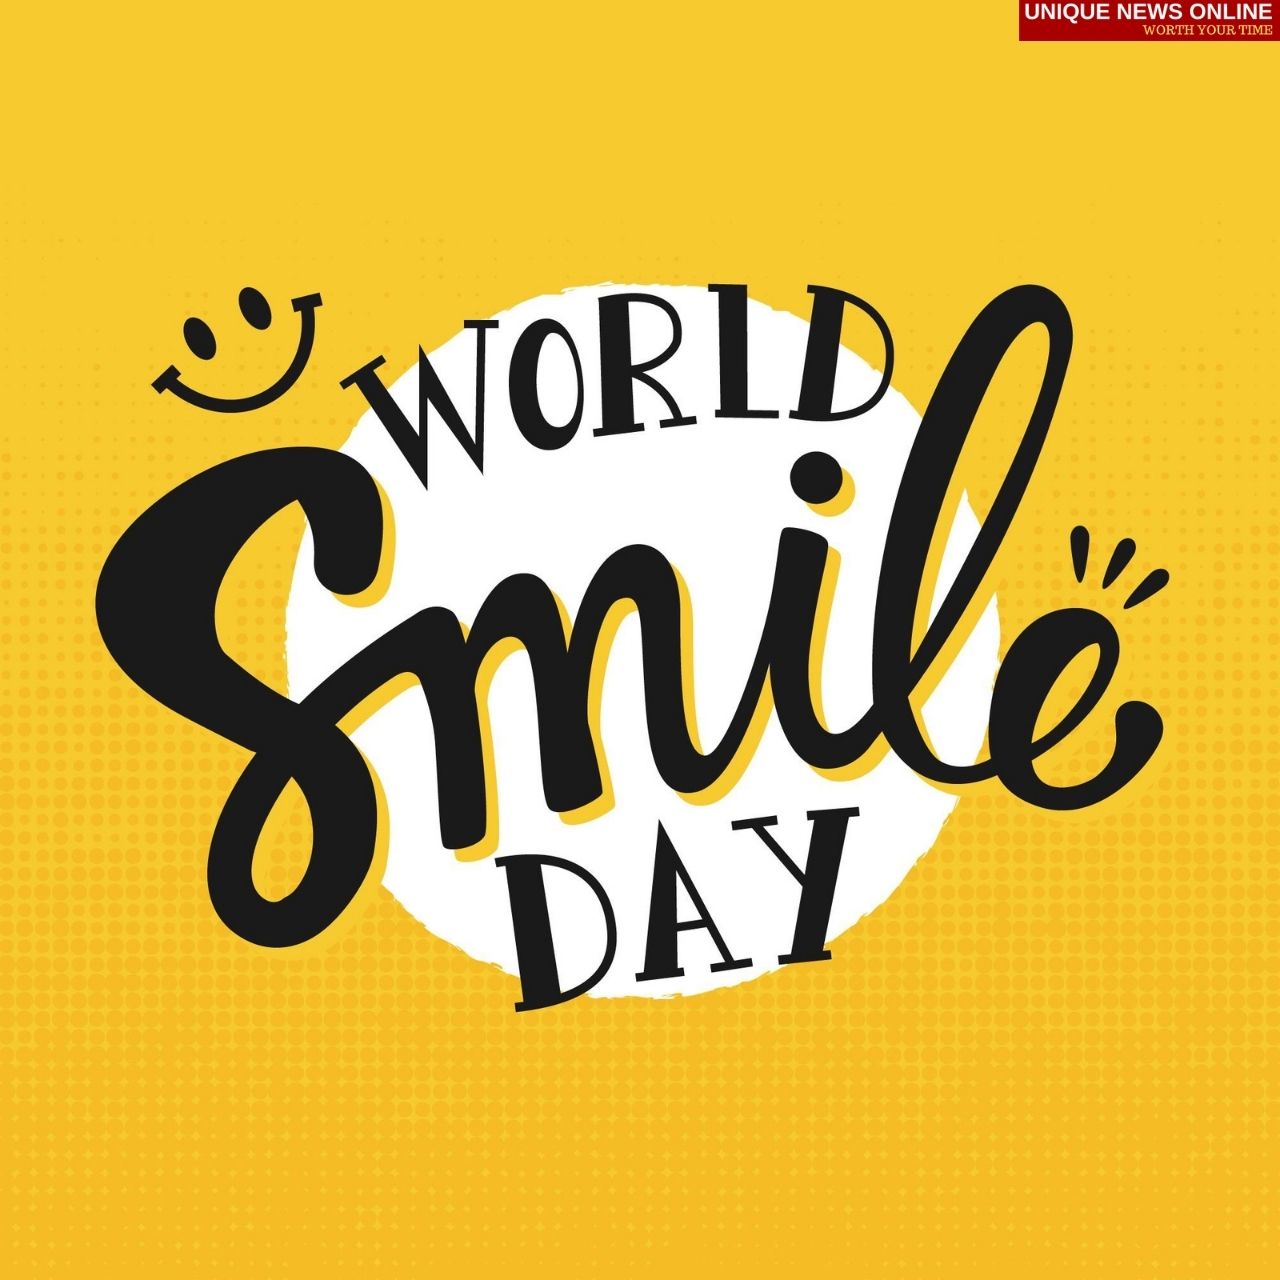 World Smile Day 2021 Quotes, Poster, Wishes, HD Images, Messages, Meme and Gif to Share